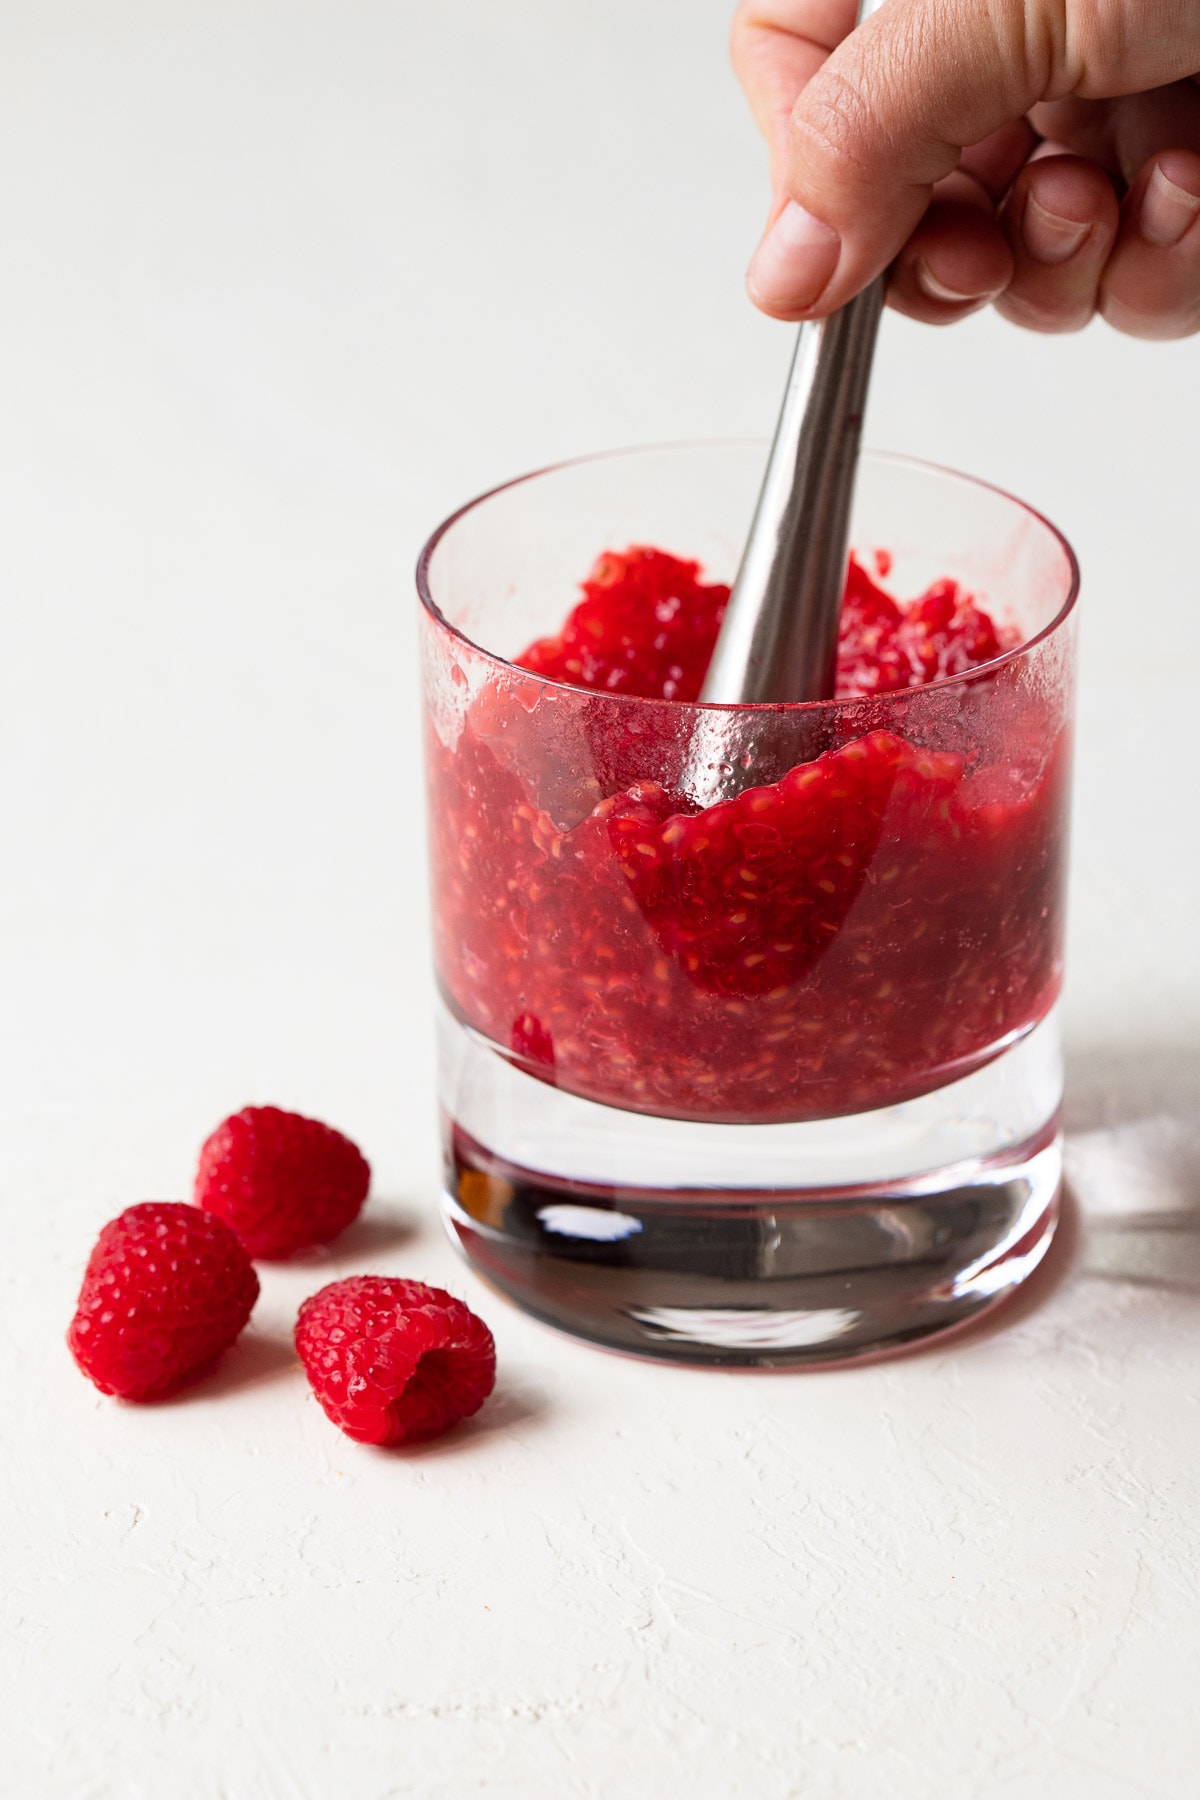 Raspberries being muddled in a glass.